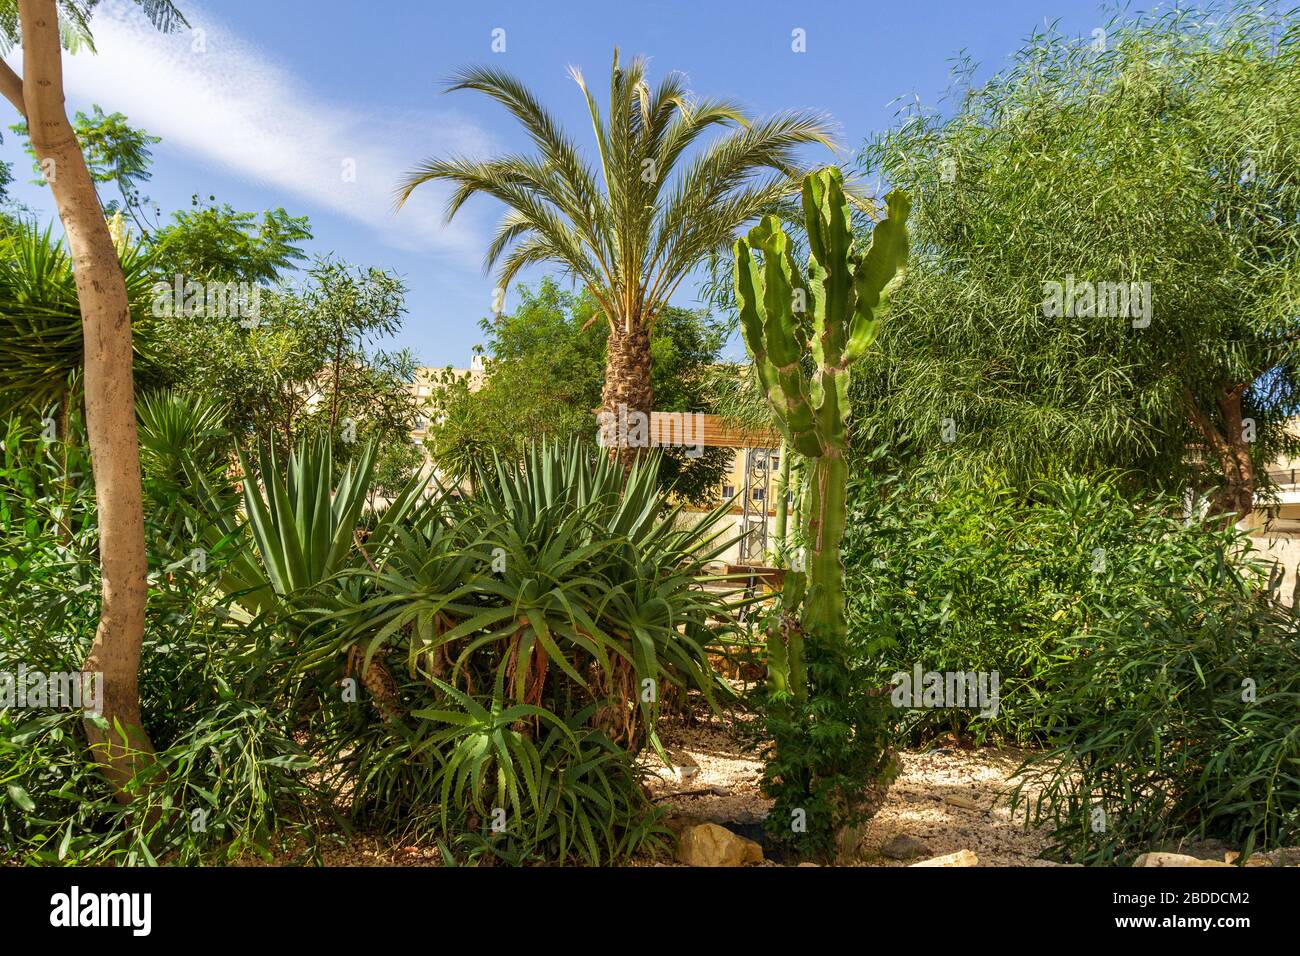 Open Space Rest Area Planted With Trees and Plants, Albox Almeria Province Andalucia Spain Stock Photo